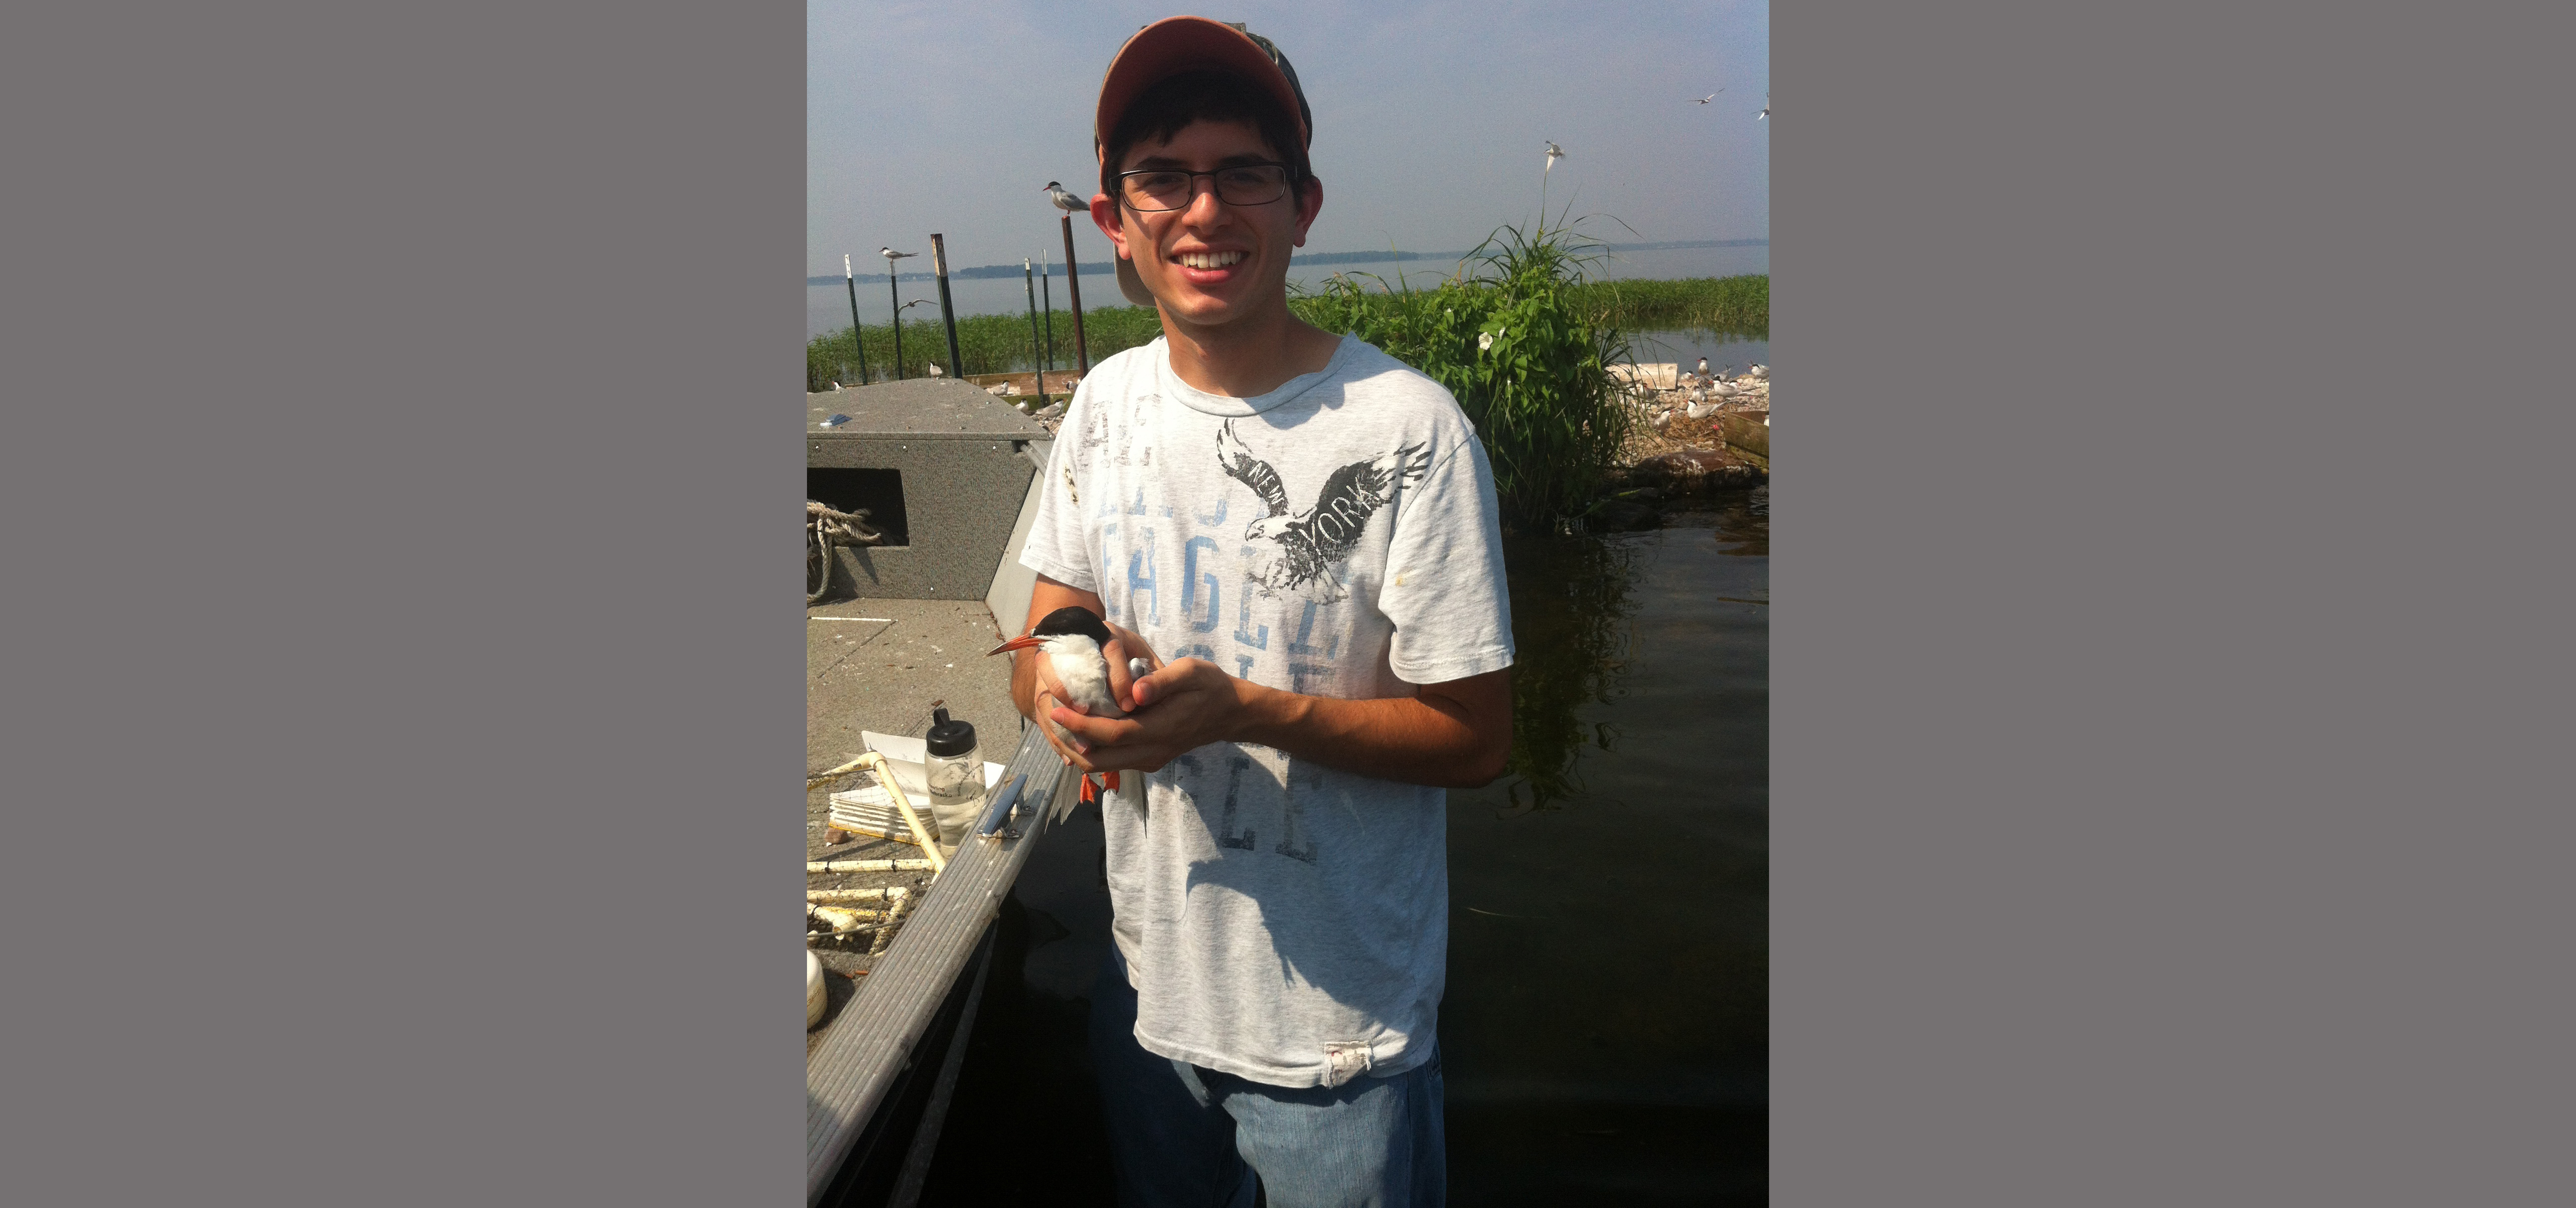 Data collection on common tern populations